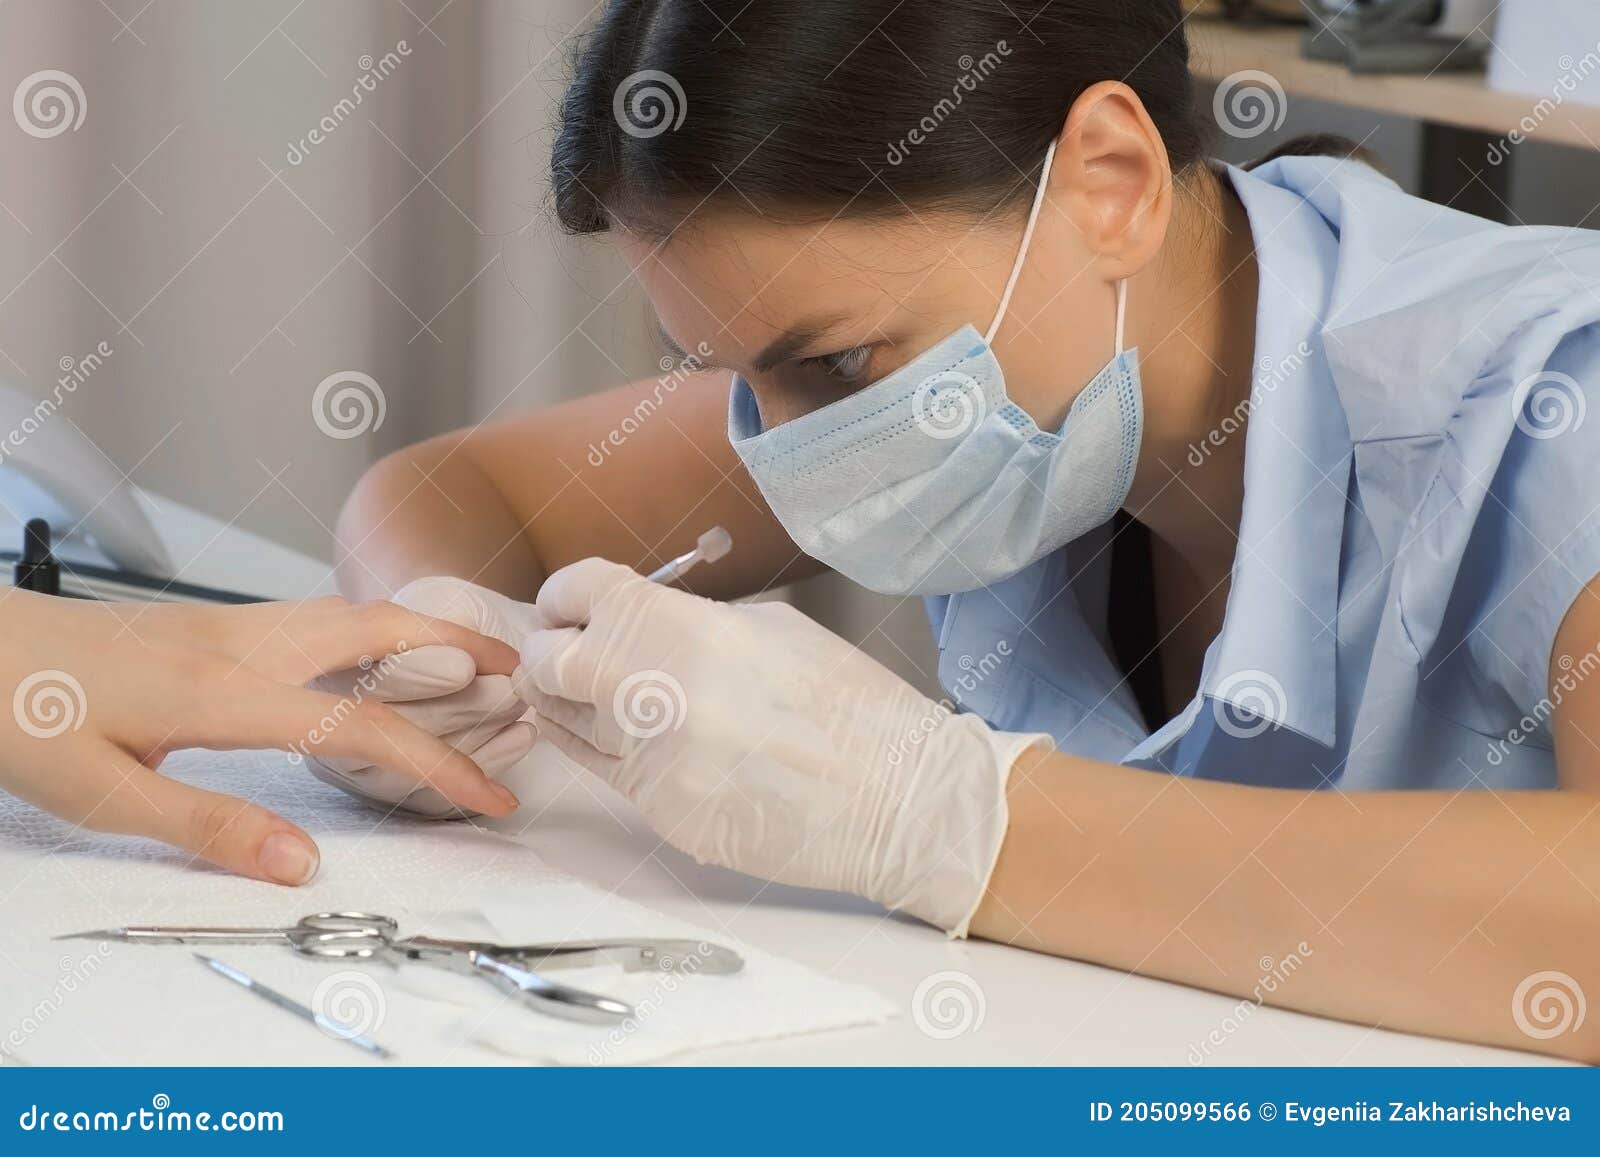 woman manicurist master is removing cuticle and pterygium using pusher.